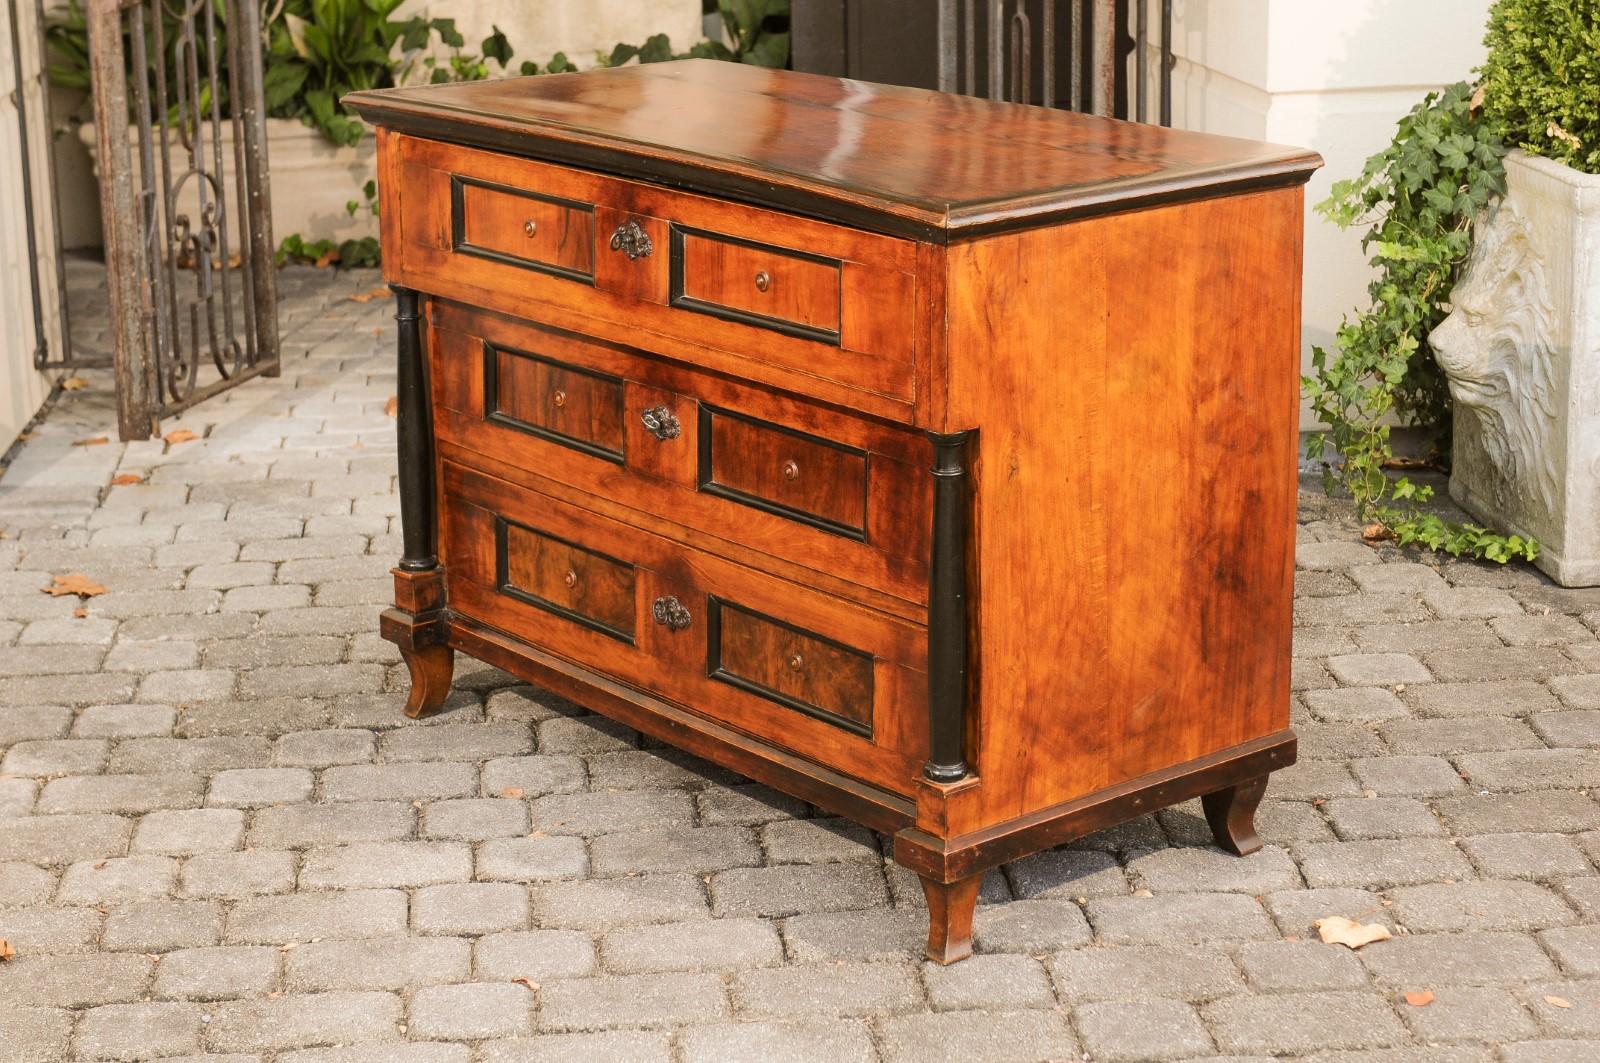 An Italian Empire walnut three-drawer commode from the early 19th century, with ebonized columns and saber feet. Born in Italy during the early years of the 19th century, this Italian Empire commode features a rectangular top with darker beveled